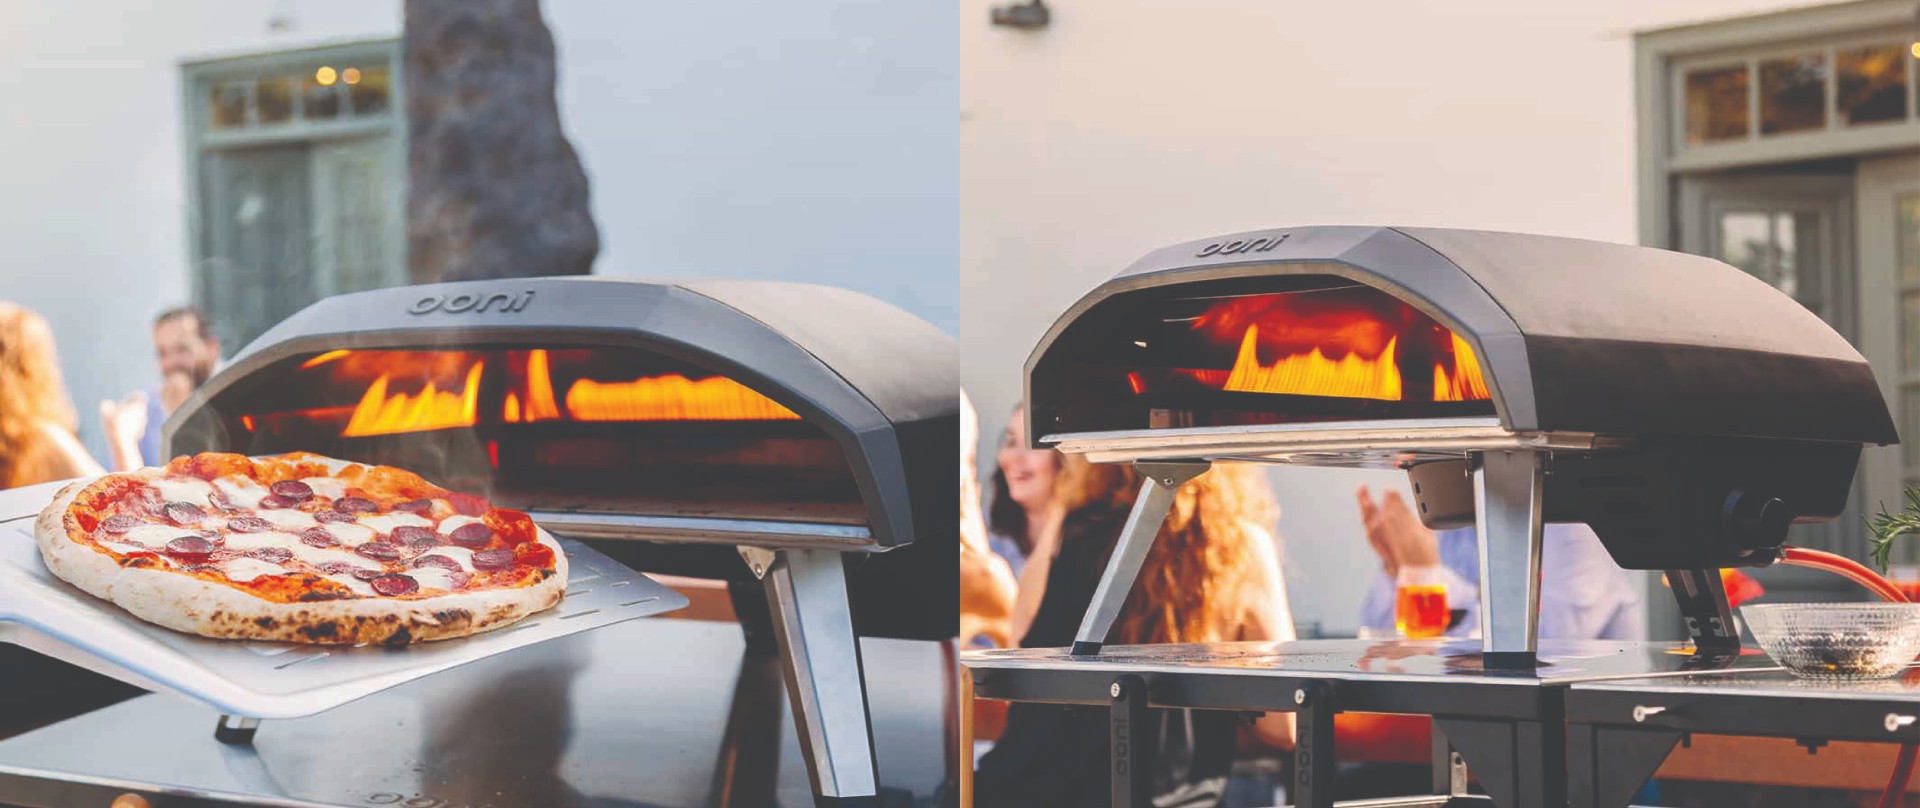 Ooni Pizza Ovens &#8211; The World&#8217;s No. 1 Pizza Oven